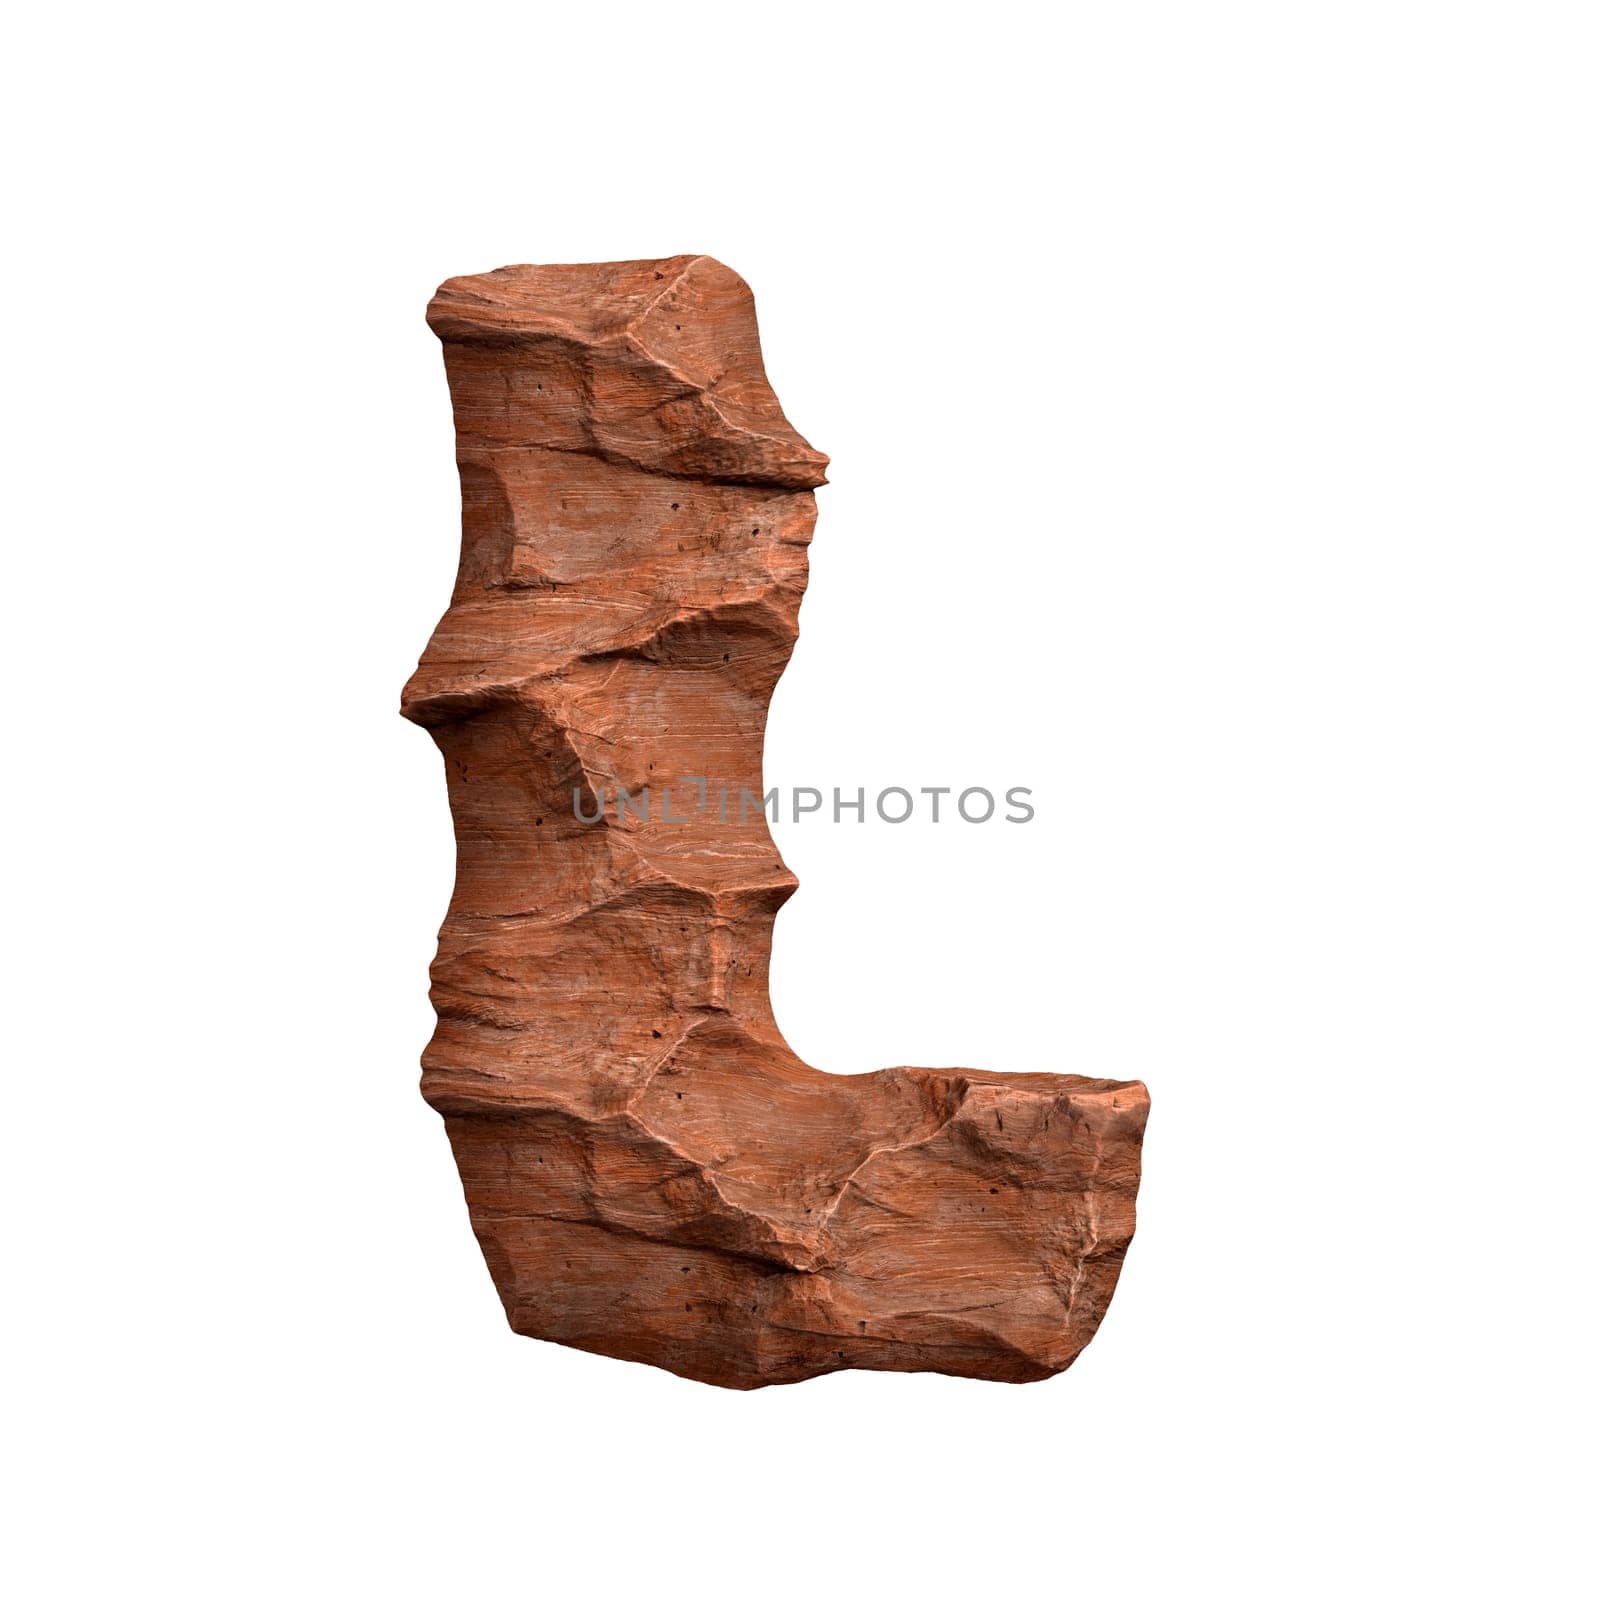 Desert sandstone letter L - Uppercase 3d red rock font isolated on white background. This alphabet is perfect for creative illustrations related but not limited to Arizona, geology, desert...